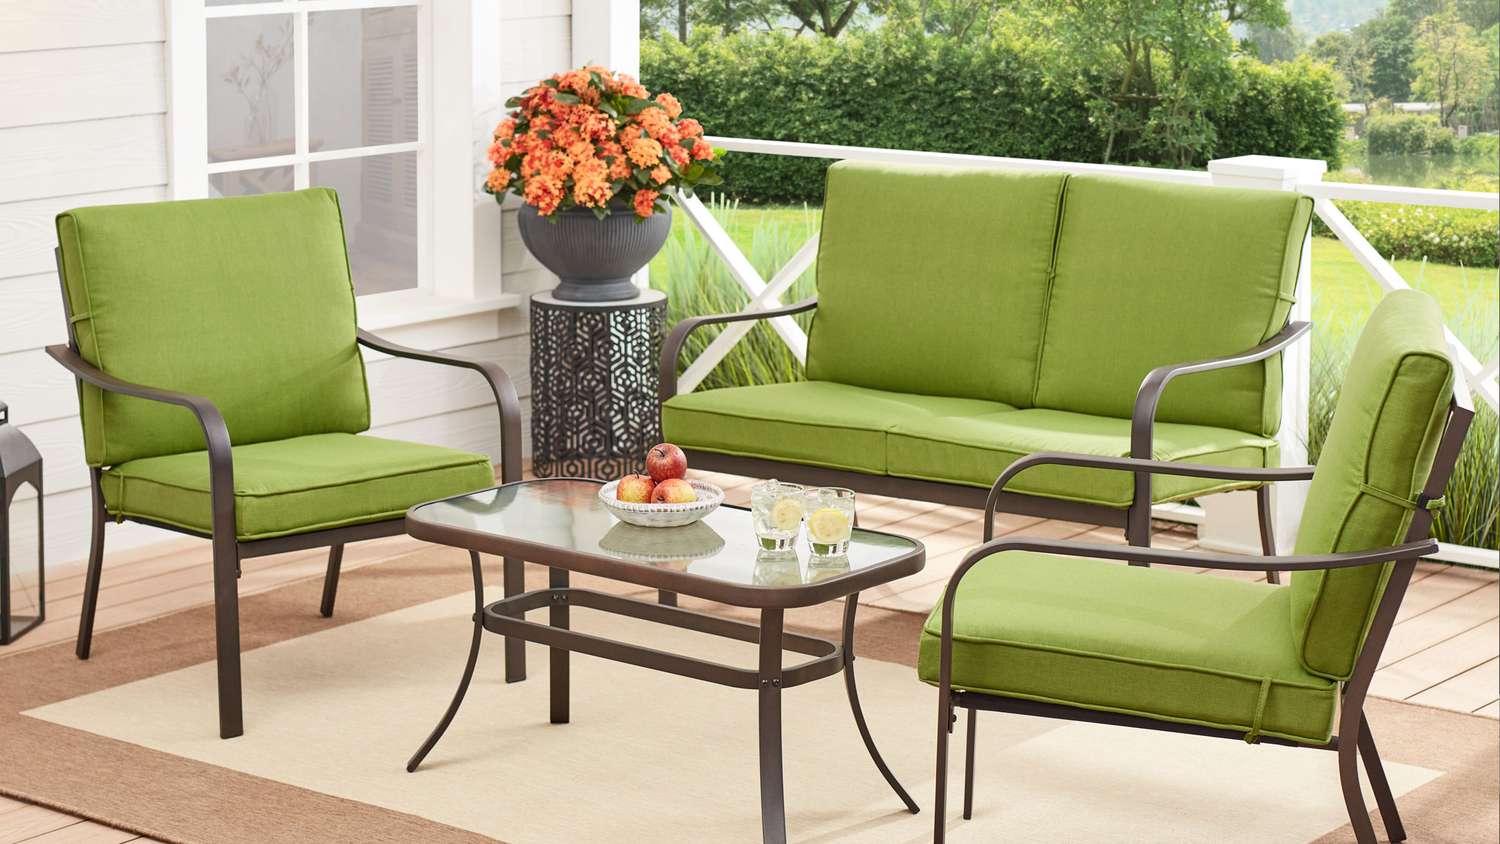 This 4 Piece Outdoor Patio Set Is Less, Patio Furniture Less Than 1000